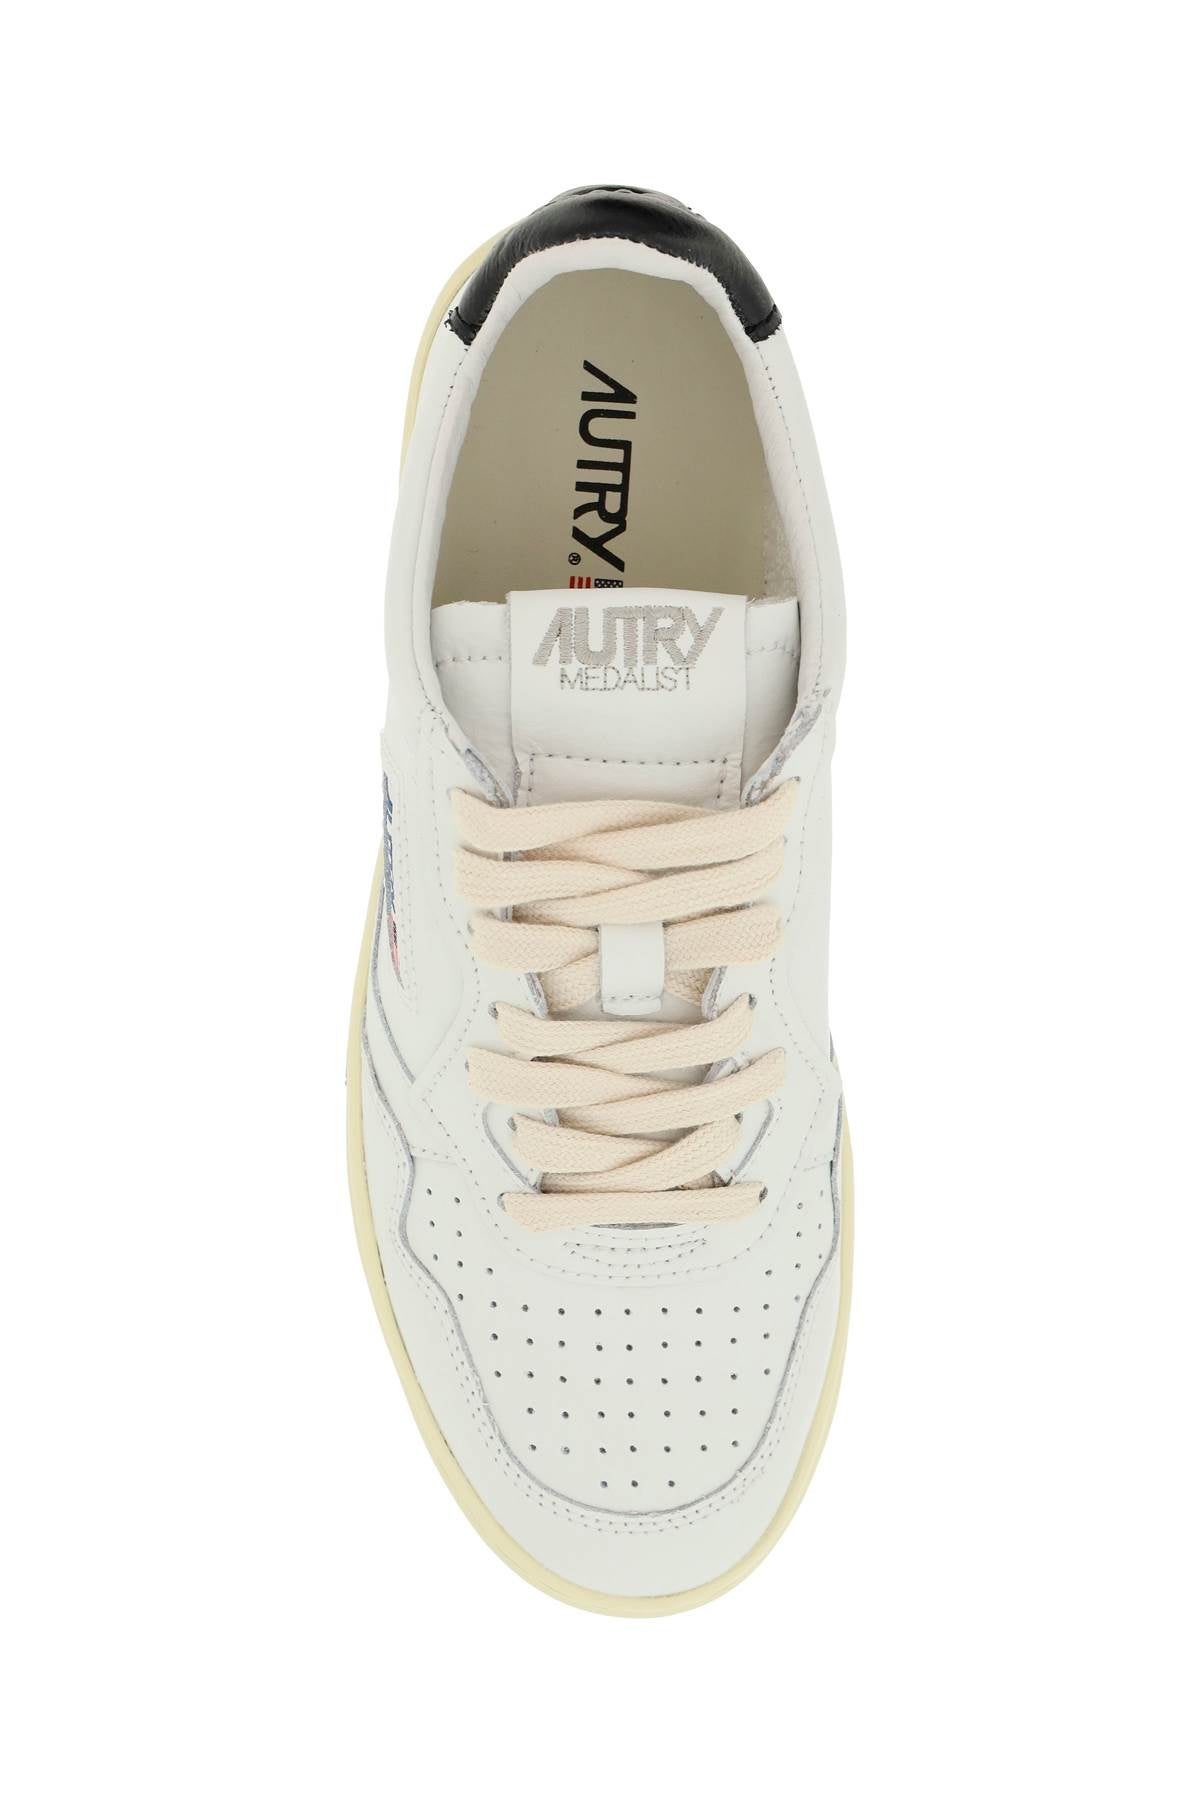 Autry 'medalist' low sneakers - White